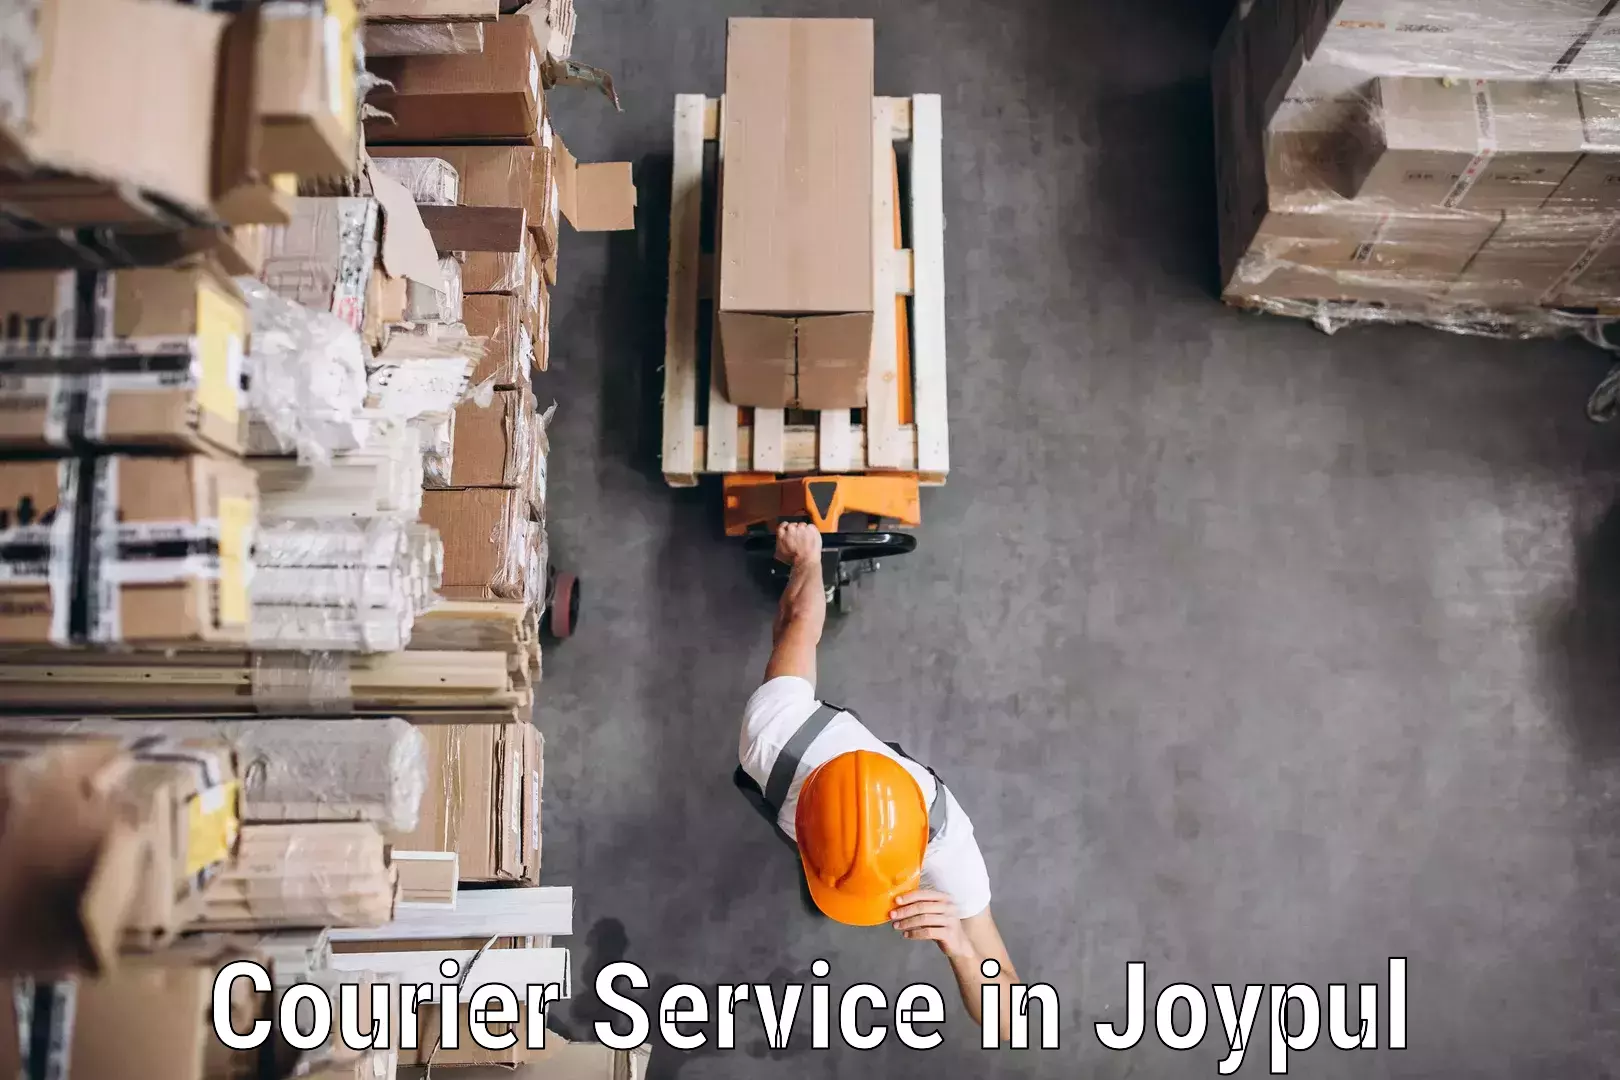 User-friendly delivery service in Joypul